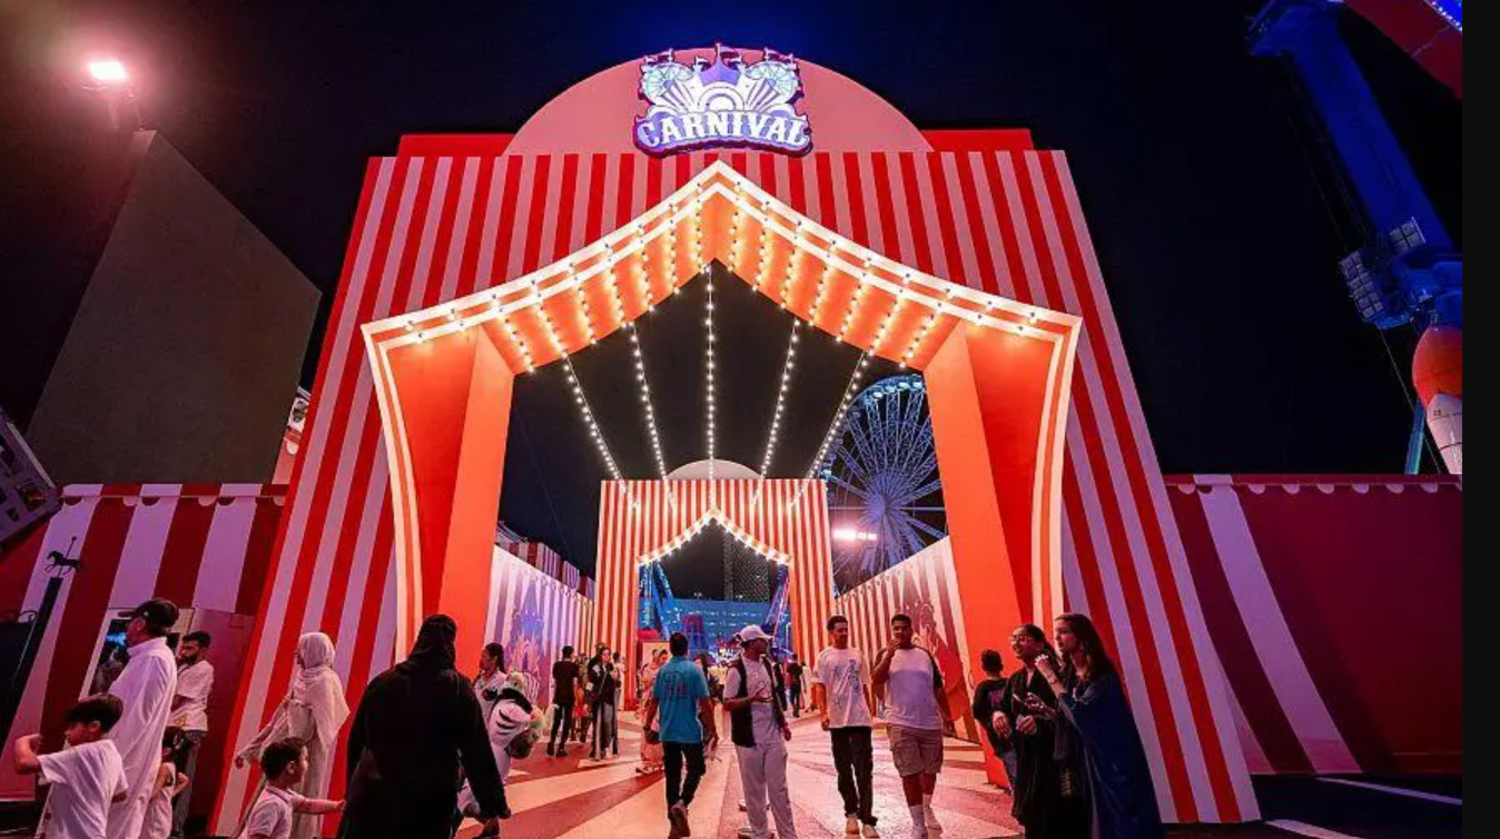 The Carnival entertainment zone embodies excitement and challenge, including kinetic game - SPA